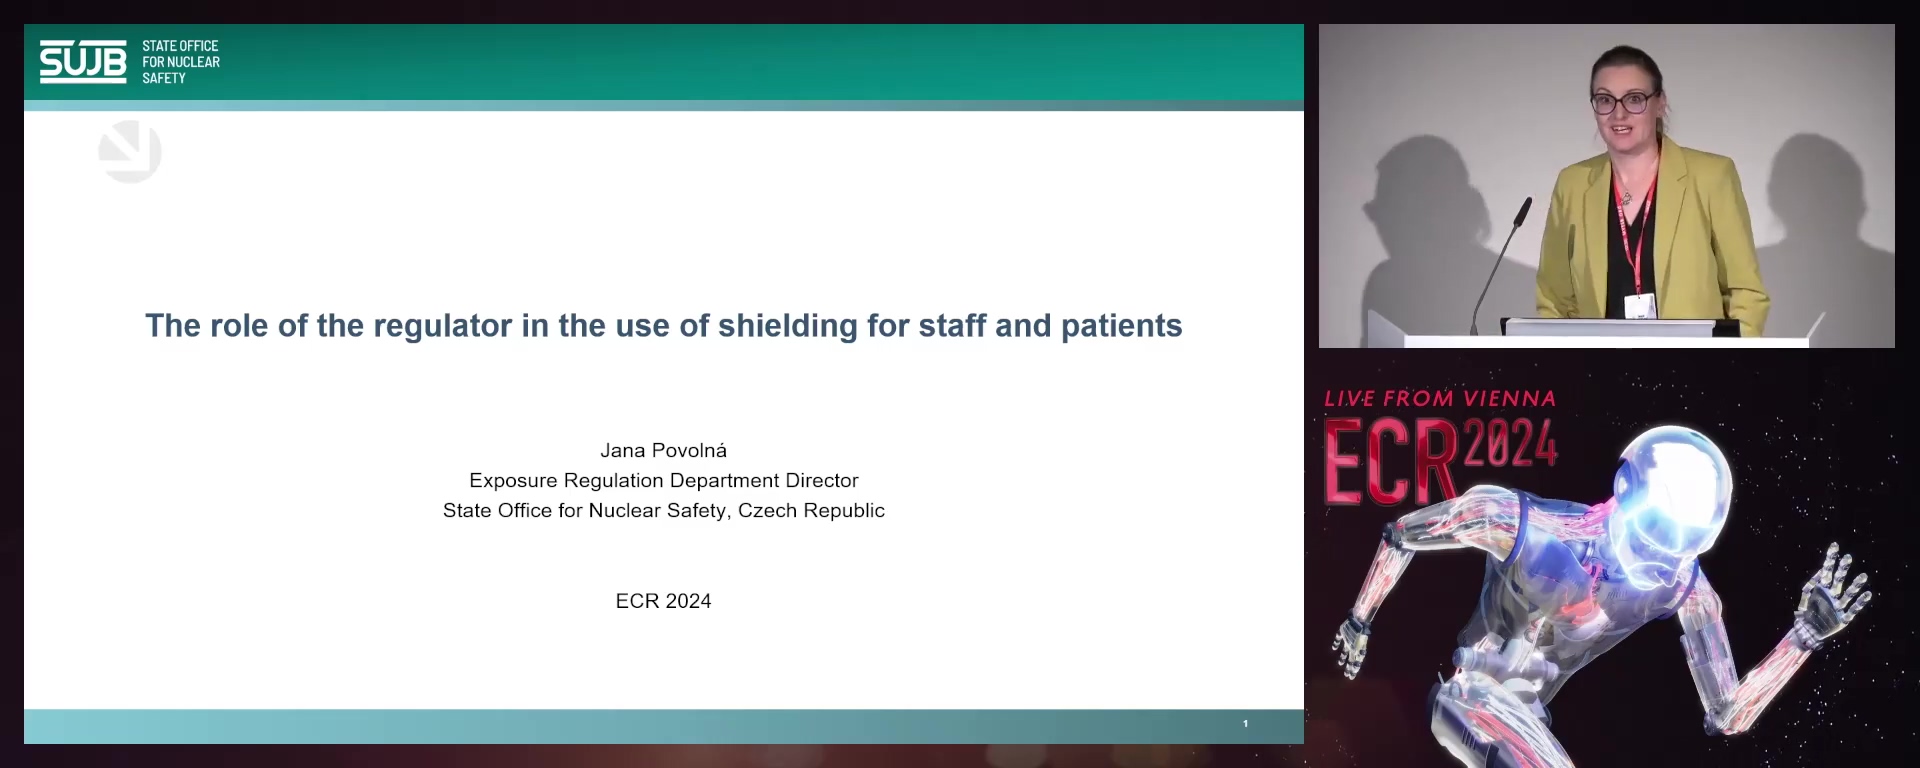 The role of the regulator in the use of shielding for staff and patients